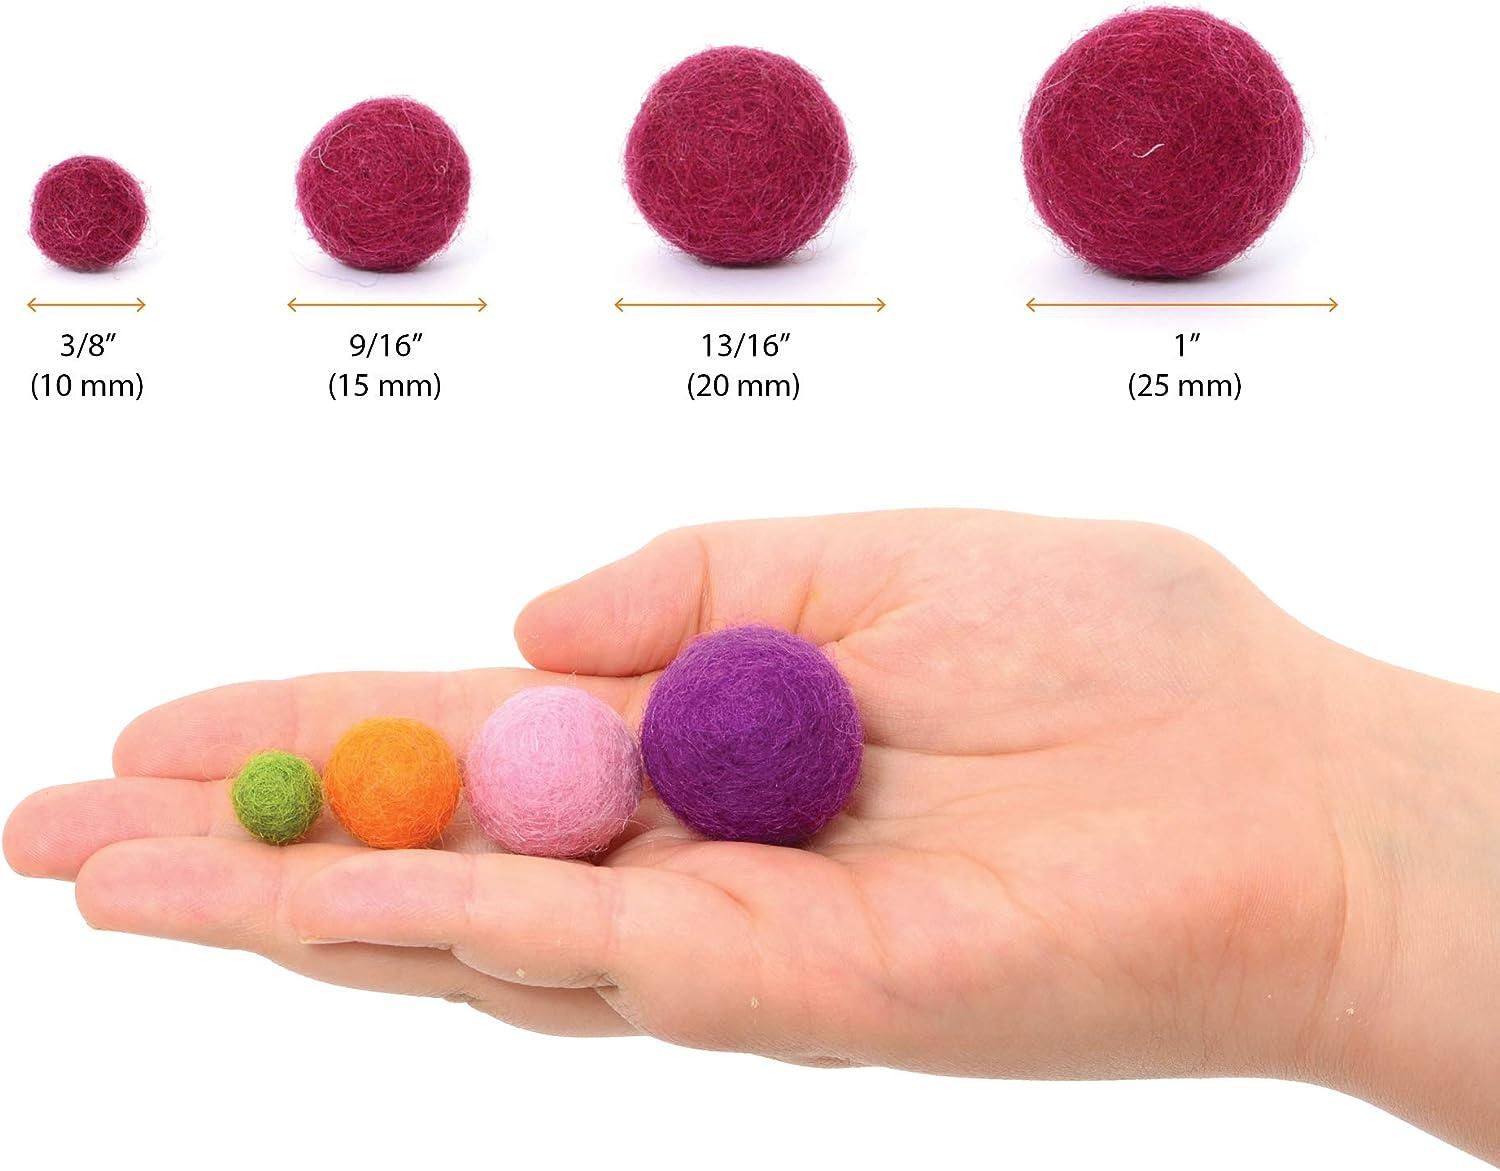 Glaciart One Felt Balls, Felt Pom Poms 10 Pieces 4 Centimeters - 1.6 inch, Handmade Felted 10 Colors Red, Blue, Orange, Yellow, Green, Pink and More